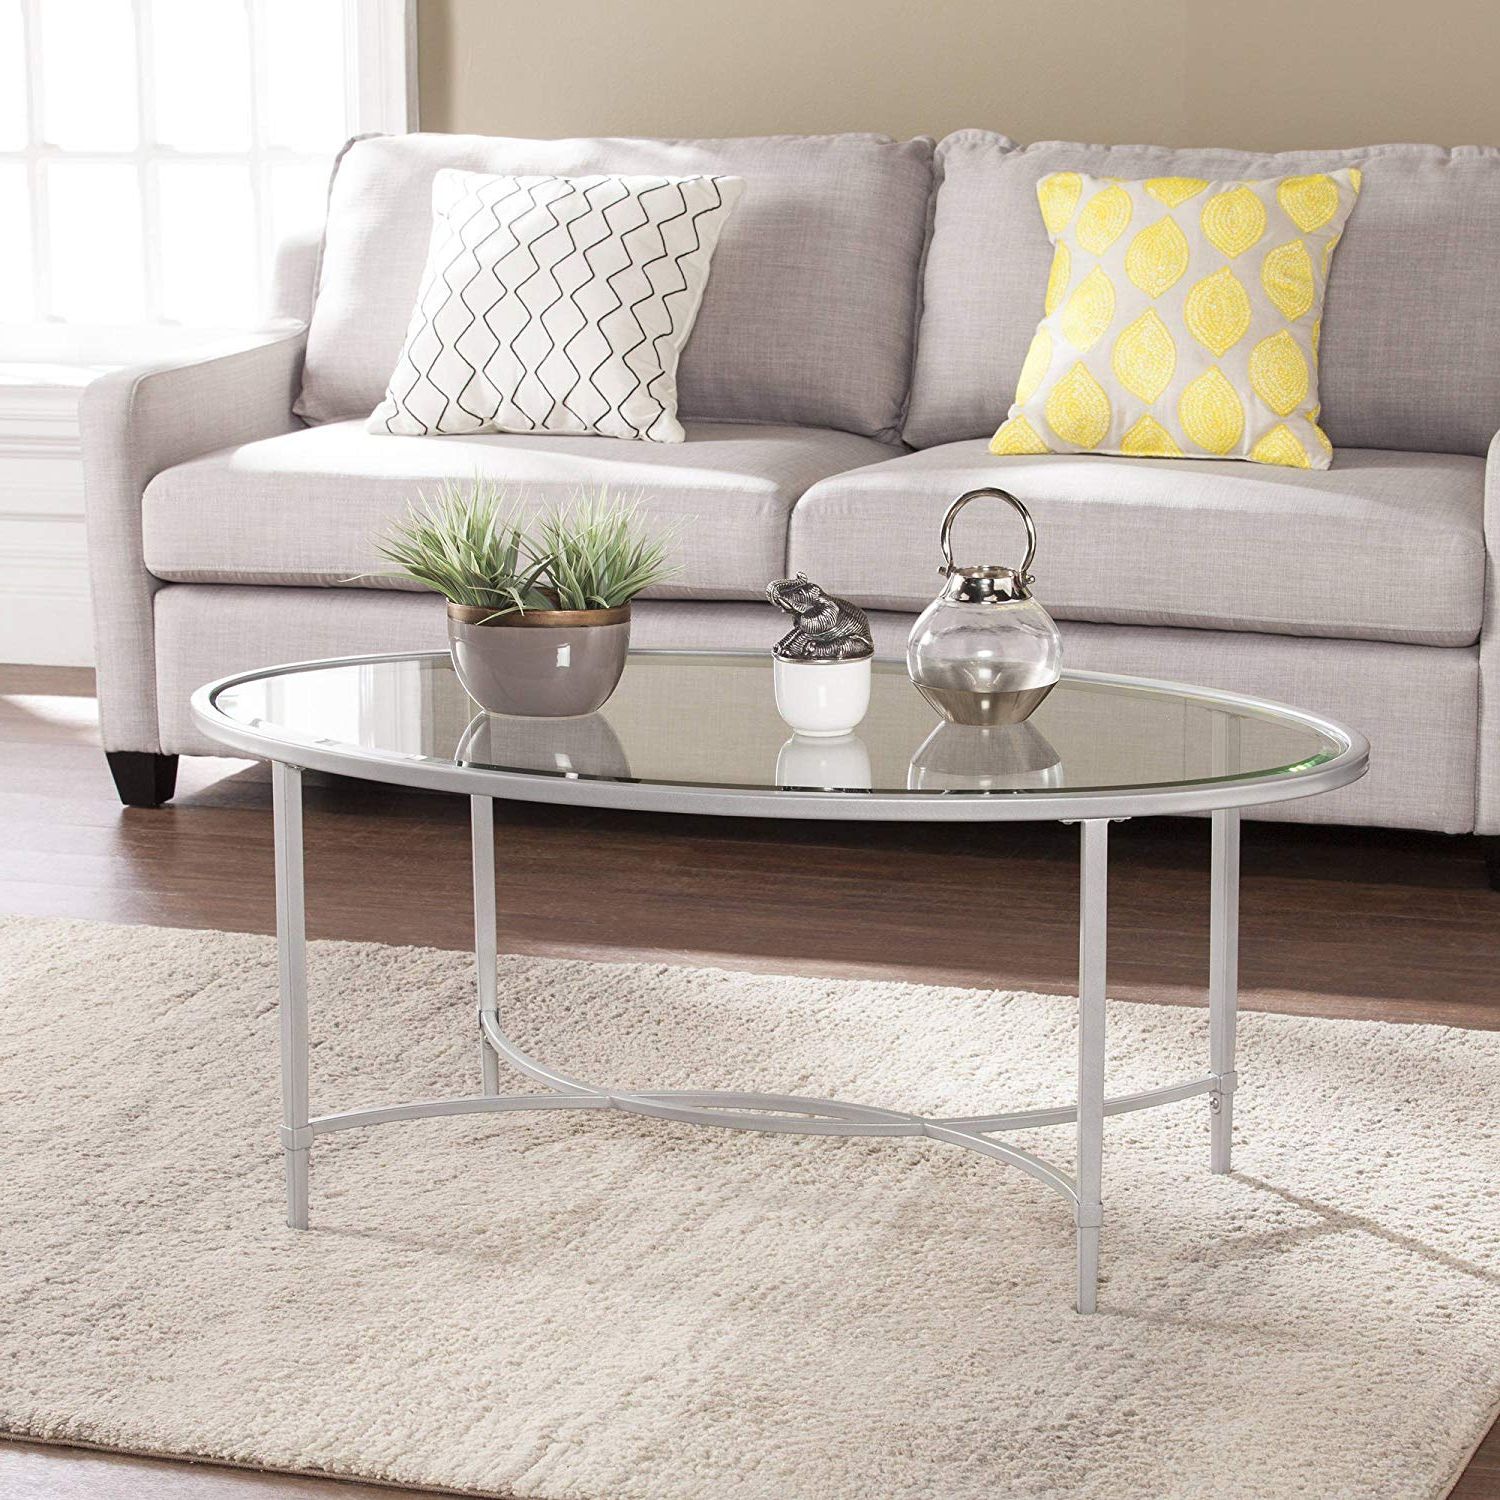 Cheap Silver Glass Coffee Table, Find Silver Glass Coffee In Most Current Cream And Gold Coffee Tables (View 3 of 20)